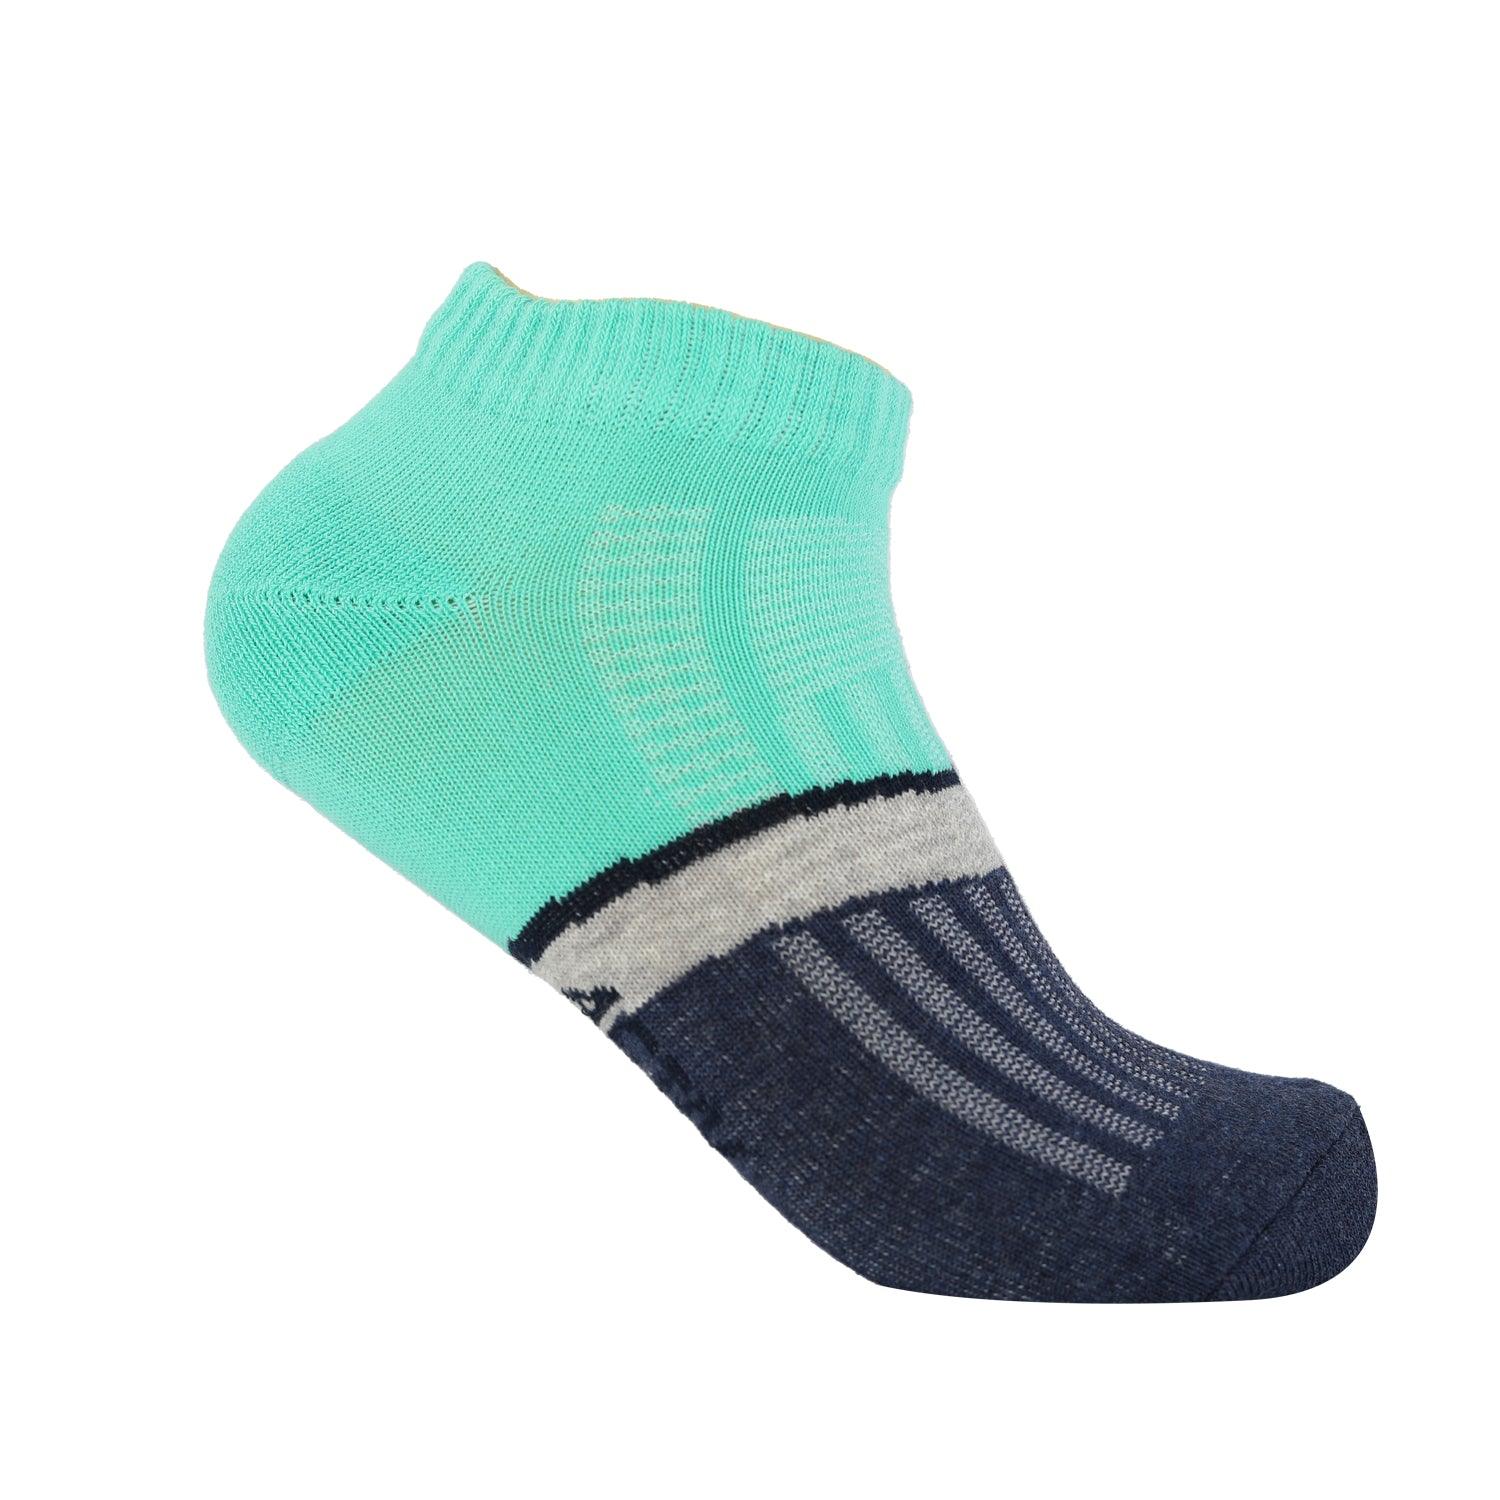 ACTIV ANKLE SOCKS PACK*3 - M.COLORS A-944 Activ Abou Alaa